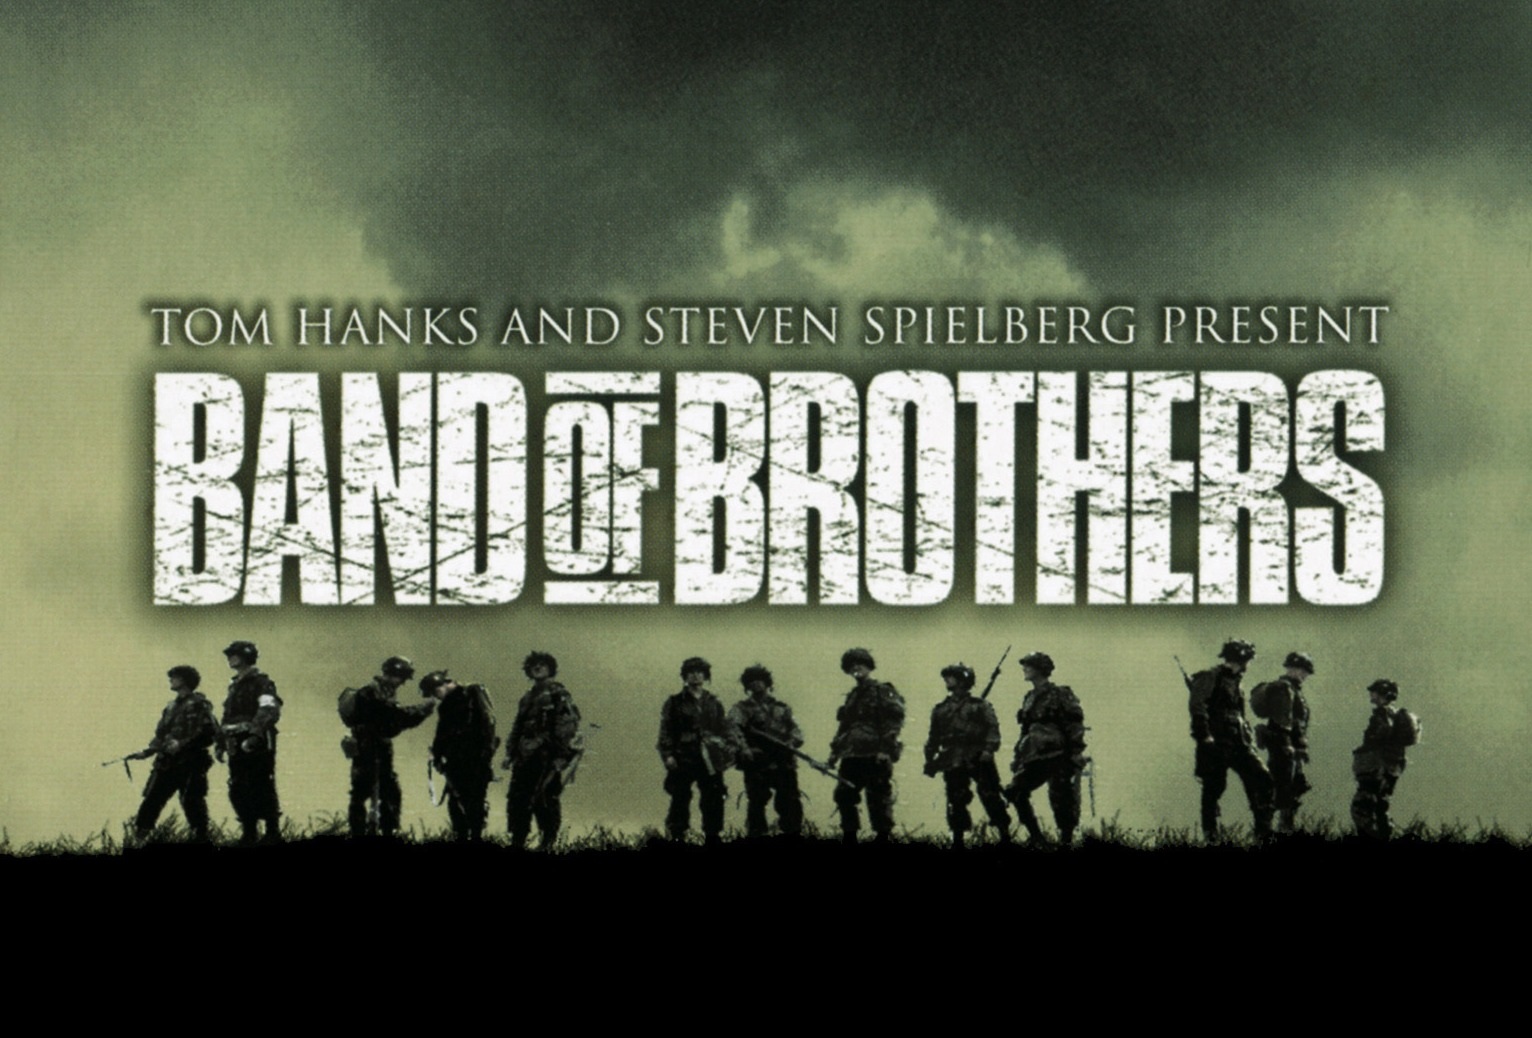 band of brothers wallpaper,font,text,movie,team,soldier